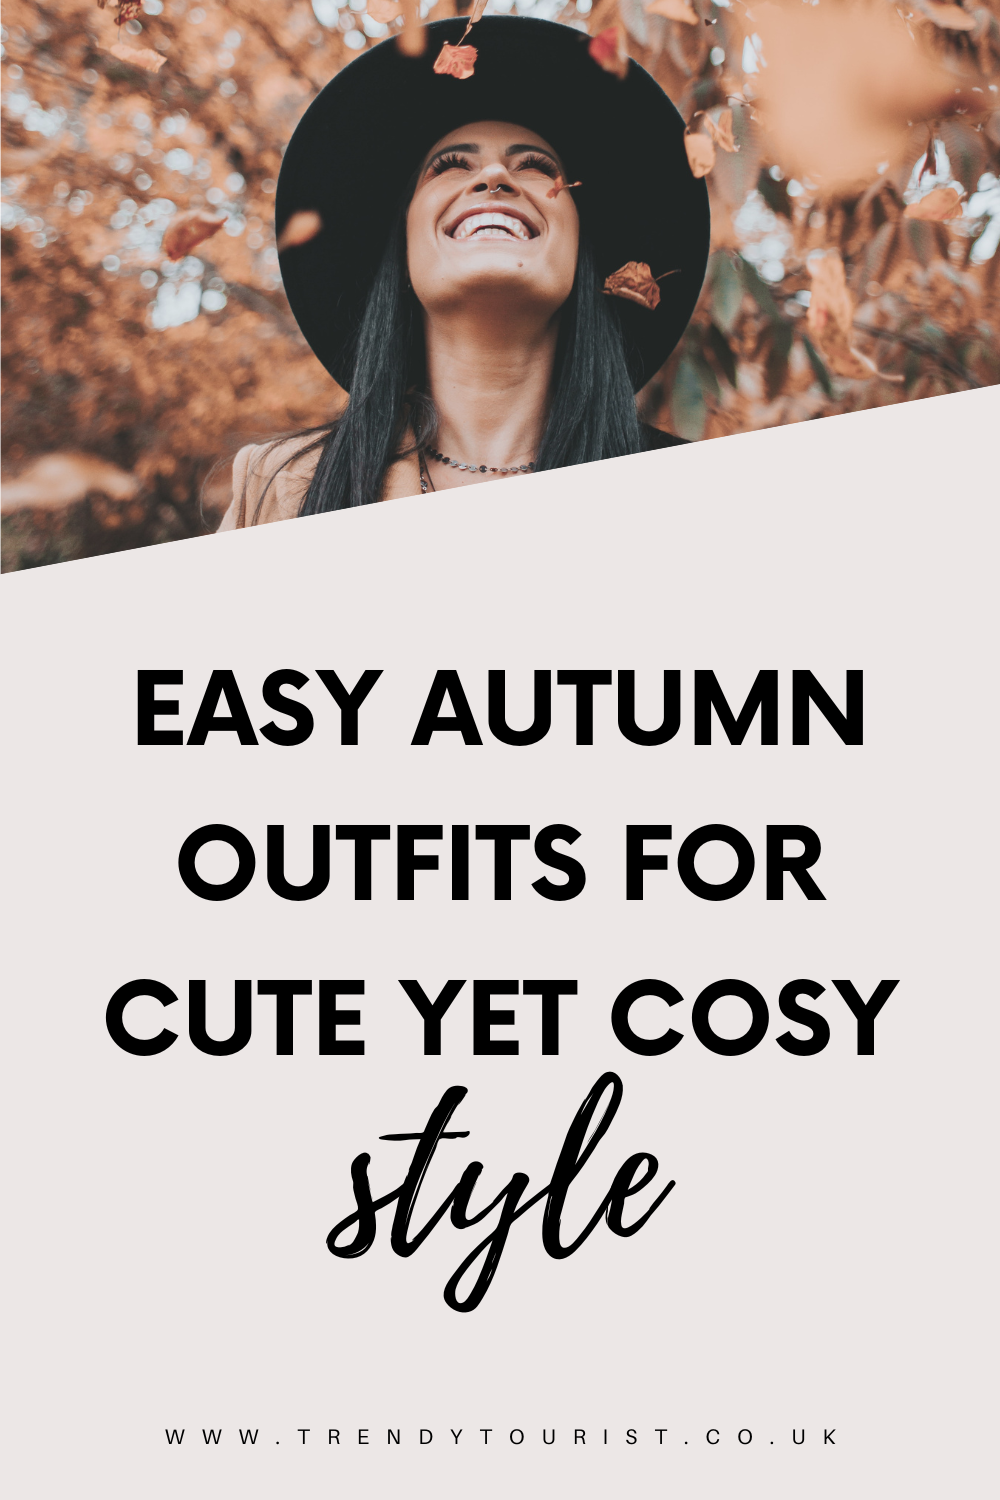 Easy Autumn Outfits for Cute Yet Cosy Style